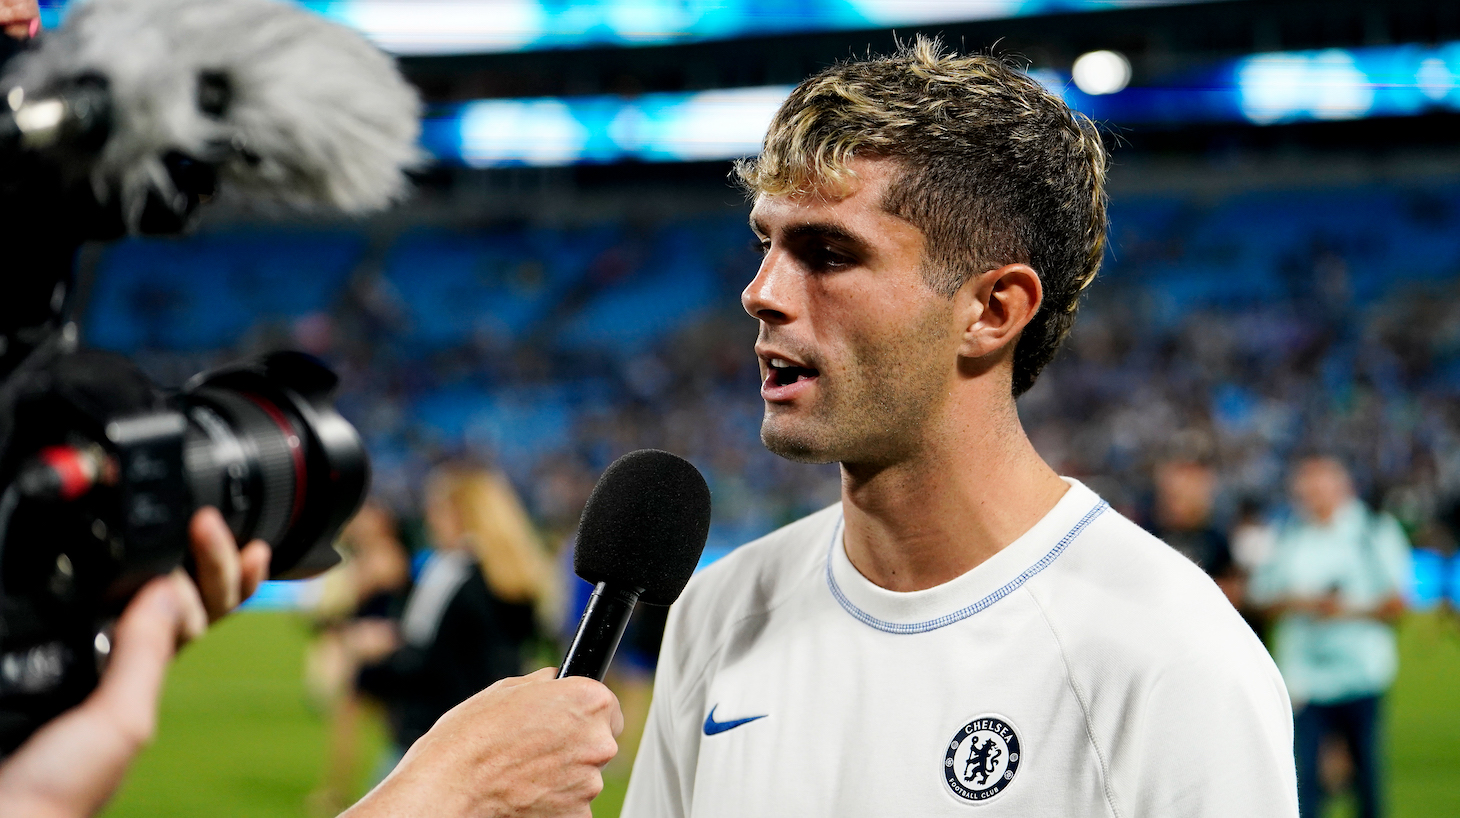 Christian Pulisic of Chelsea speaks to the media after the Pre-Season Friendly match between Chelsea FC and Charlotte FC at Bank of America Stadium on July 20, 2022 in Charlotte, North Carolina.